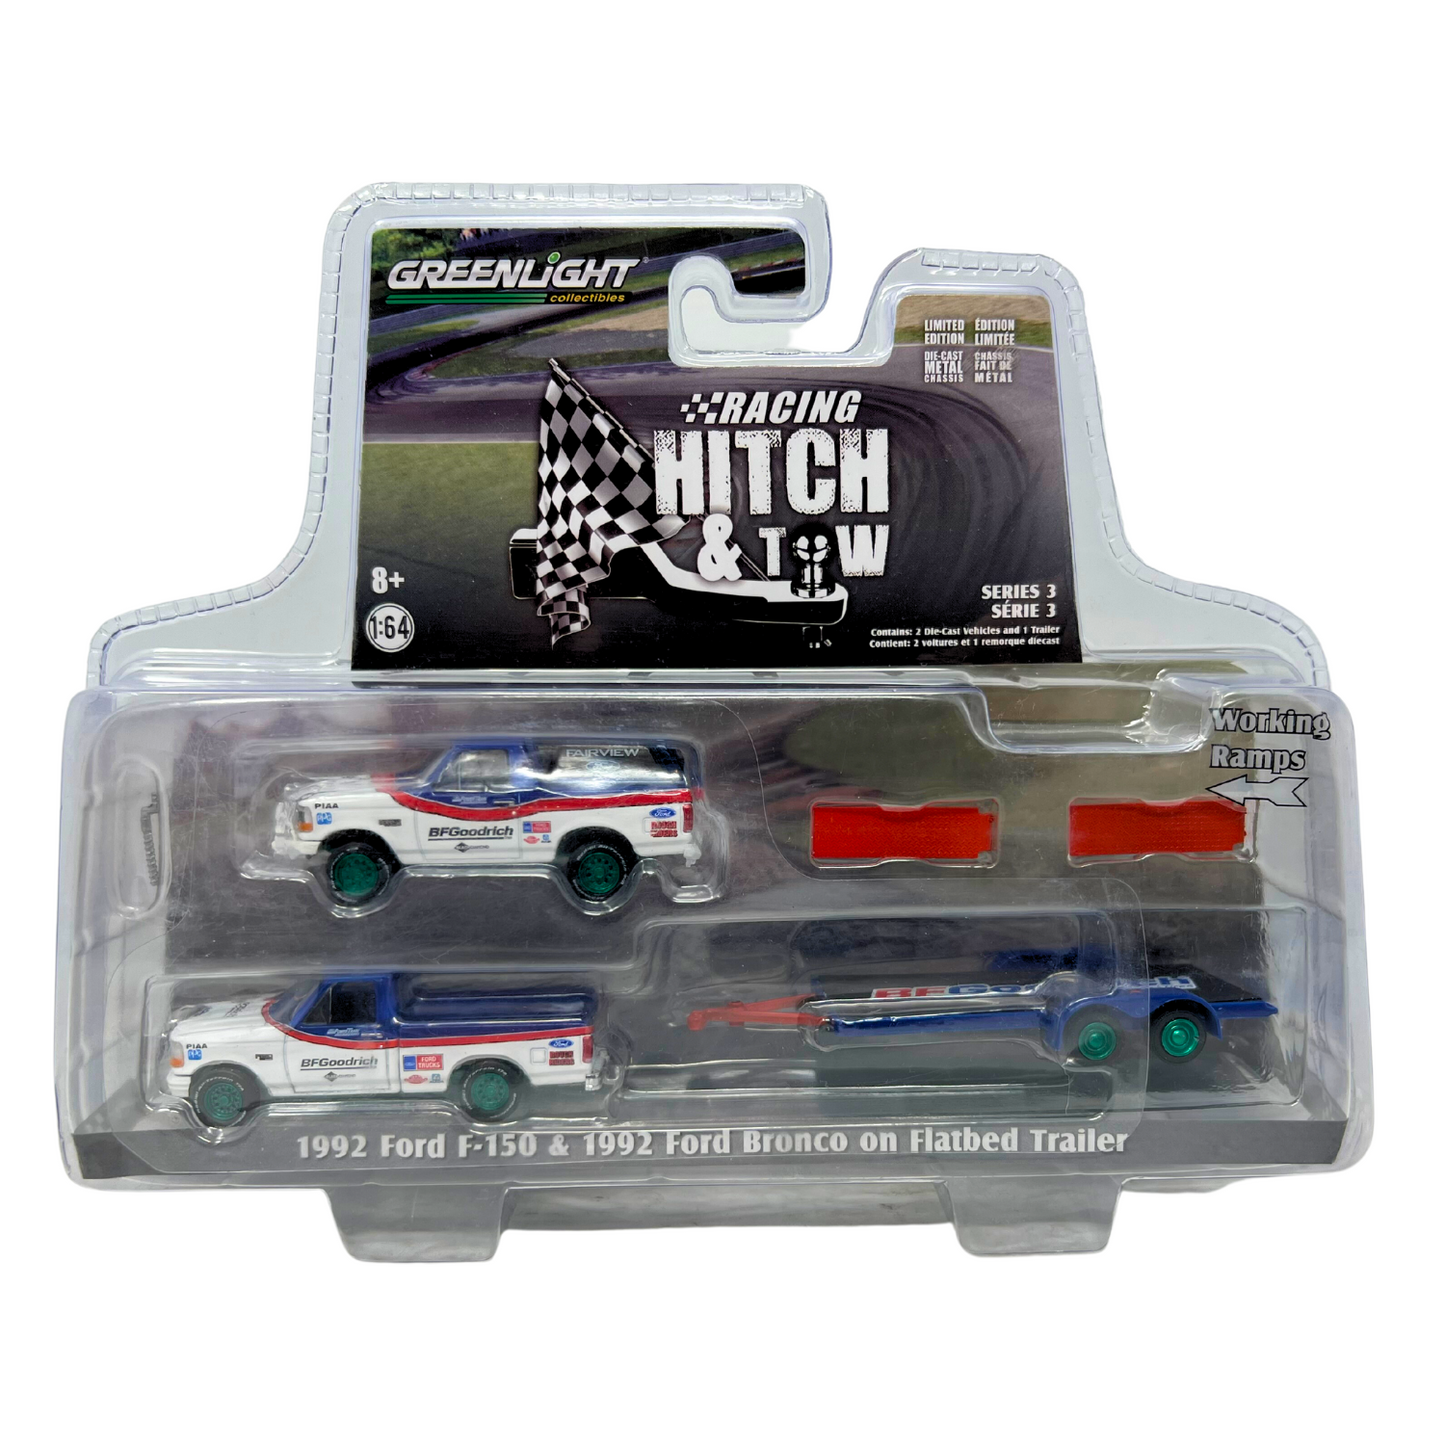 Greenlight Hitch & Tow 1992 Ford F-150 & Ford Bronco Green Machine 1:64 Diecast